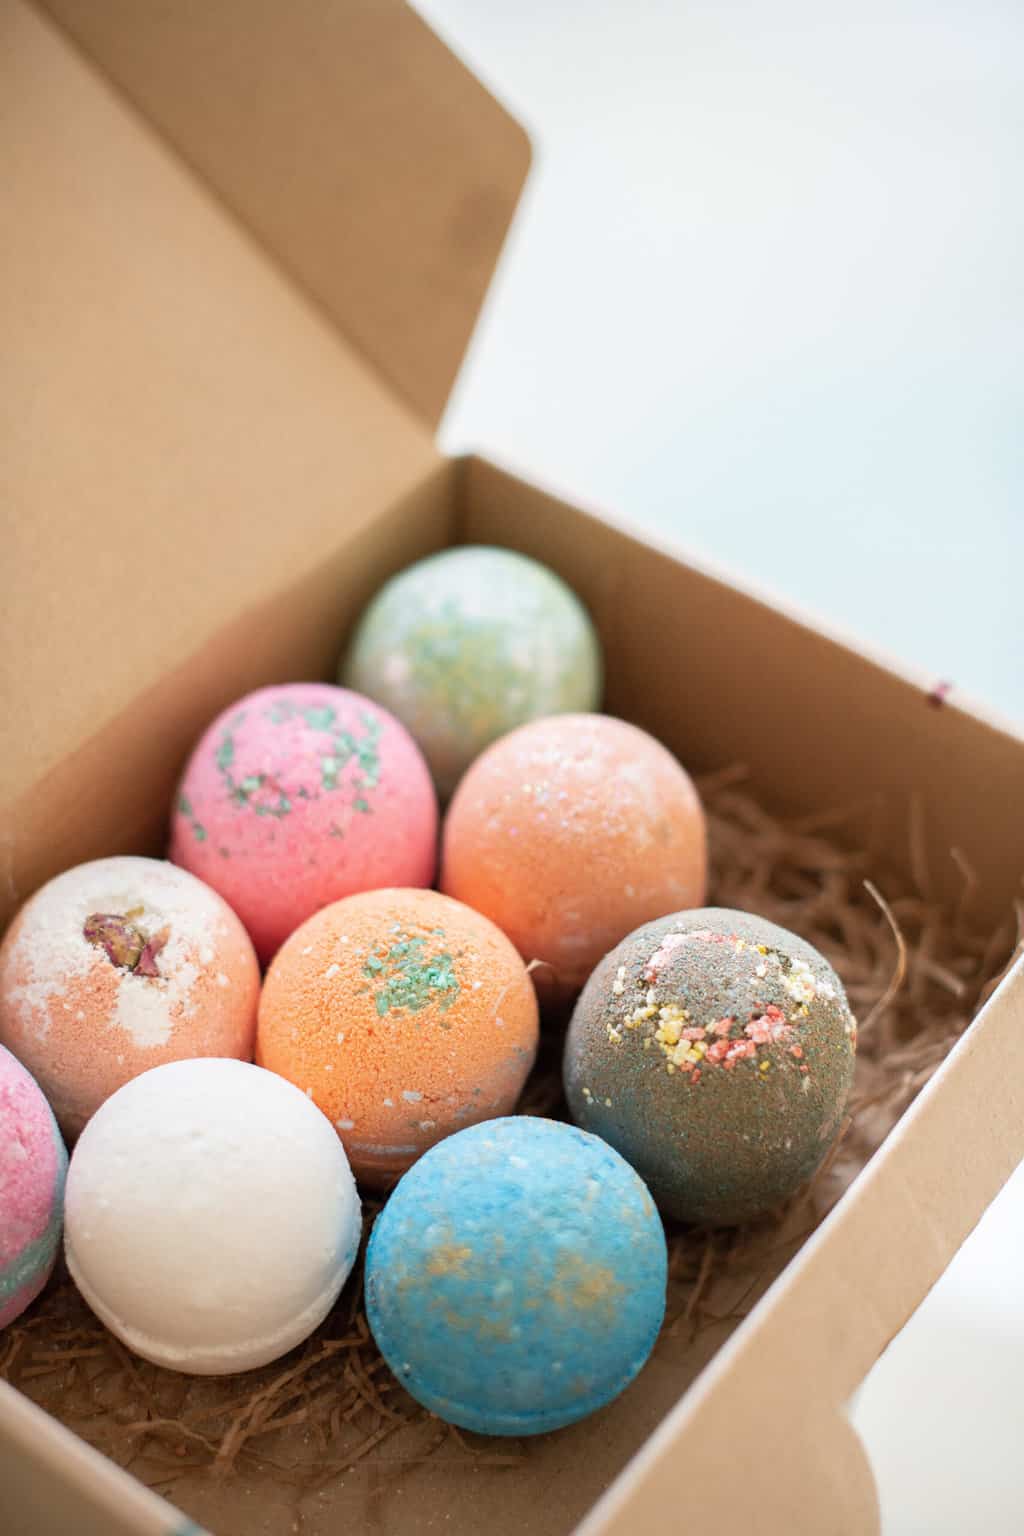 How To Use a Bath Bomb—The Right Way!